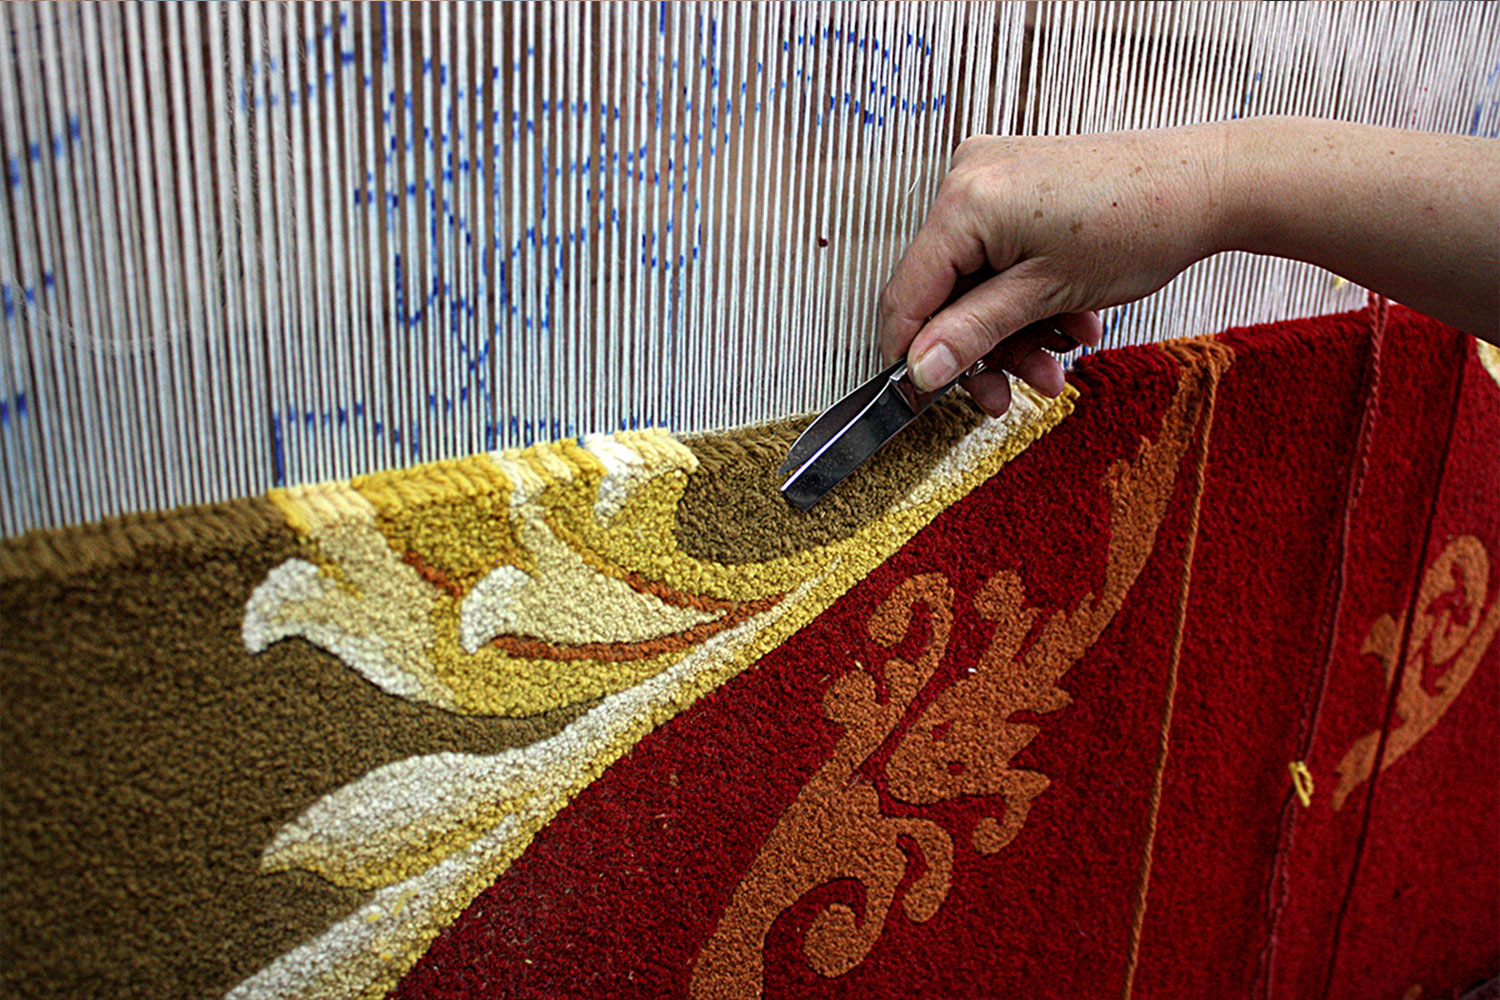 Guided tours of the Royal Tapestry Factory